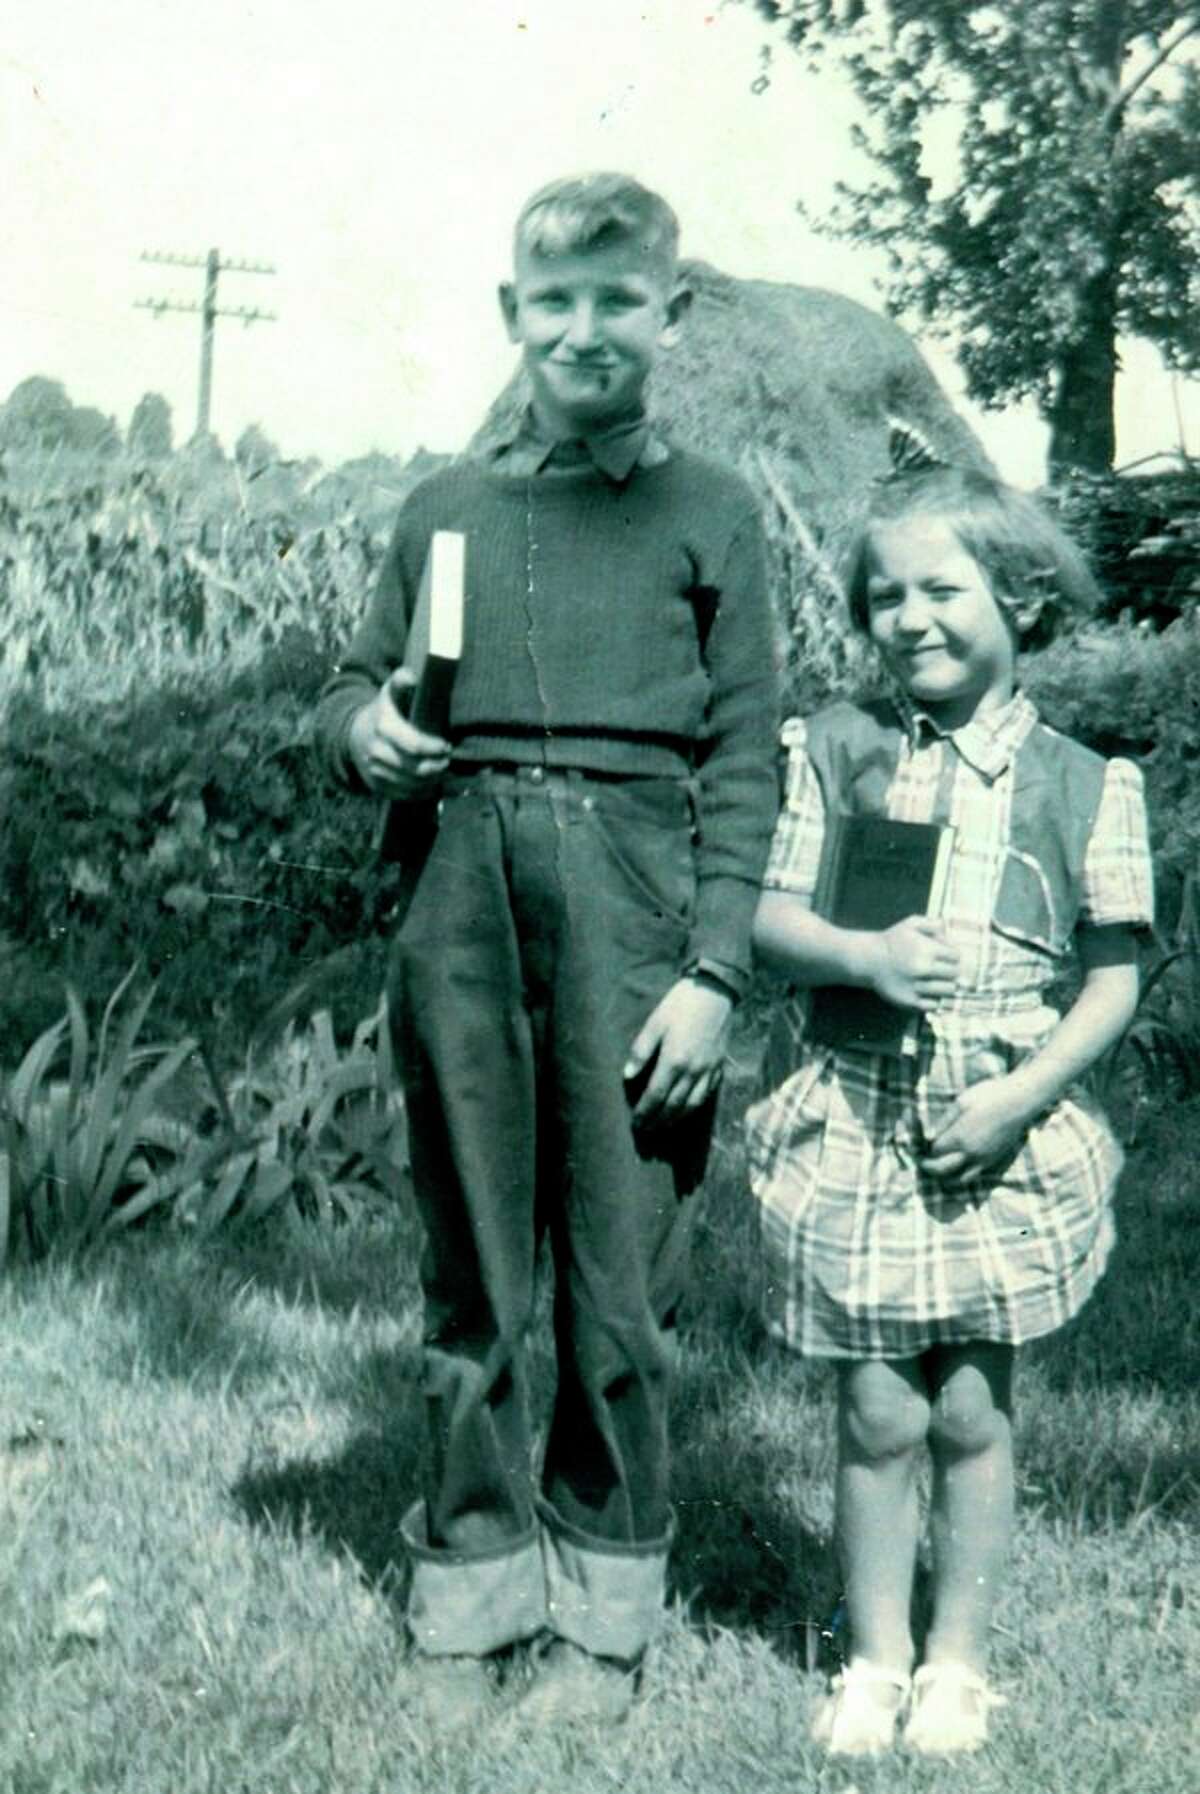 This is Caroline Kern Foster on her first day of school. Her youngest uncle Roland is with her. The photo was taken in 1940. Caroline grew up in a warm and loving family circle in Fairgrove and when her dad Ted decided to move to Beaverton when she was 10, leaving the family behind devastated her.